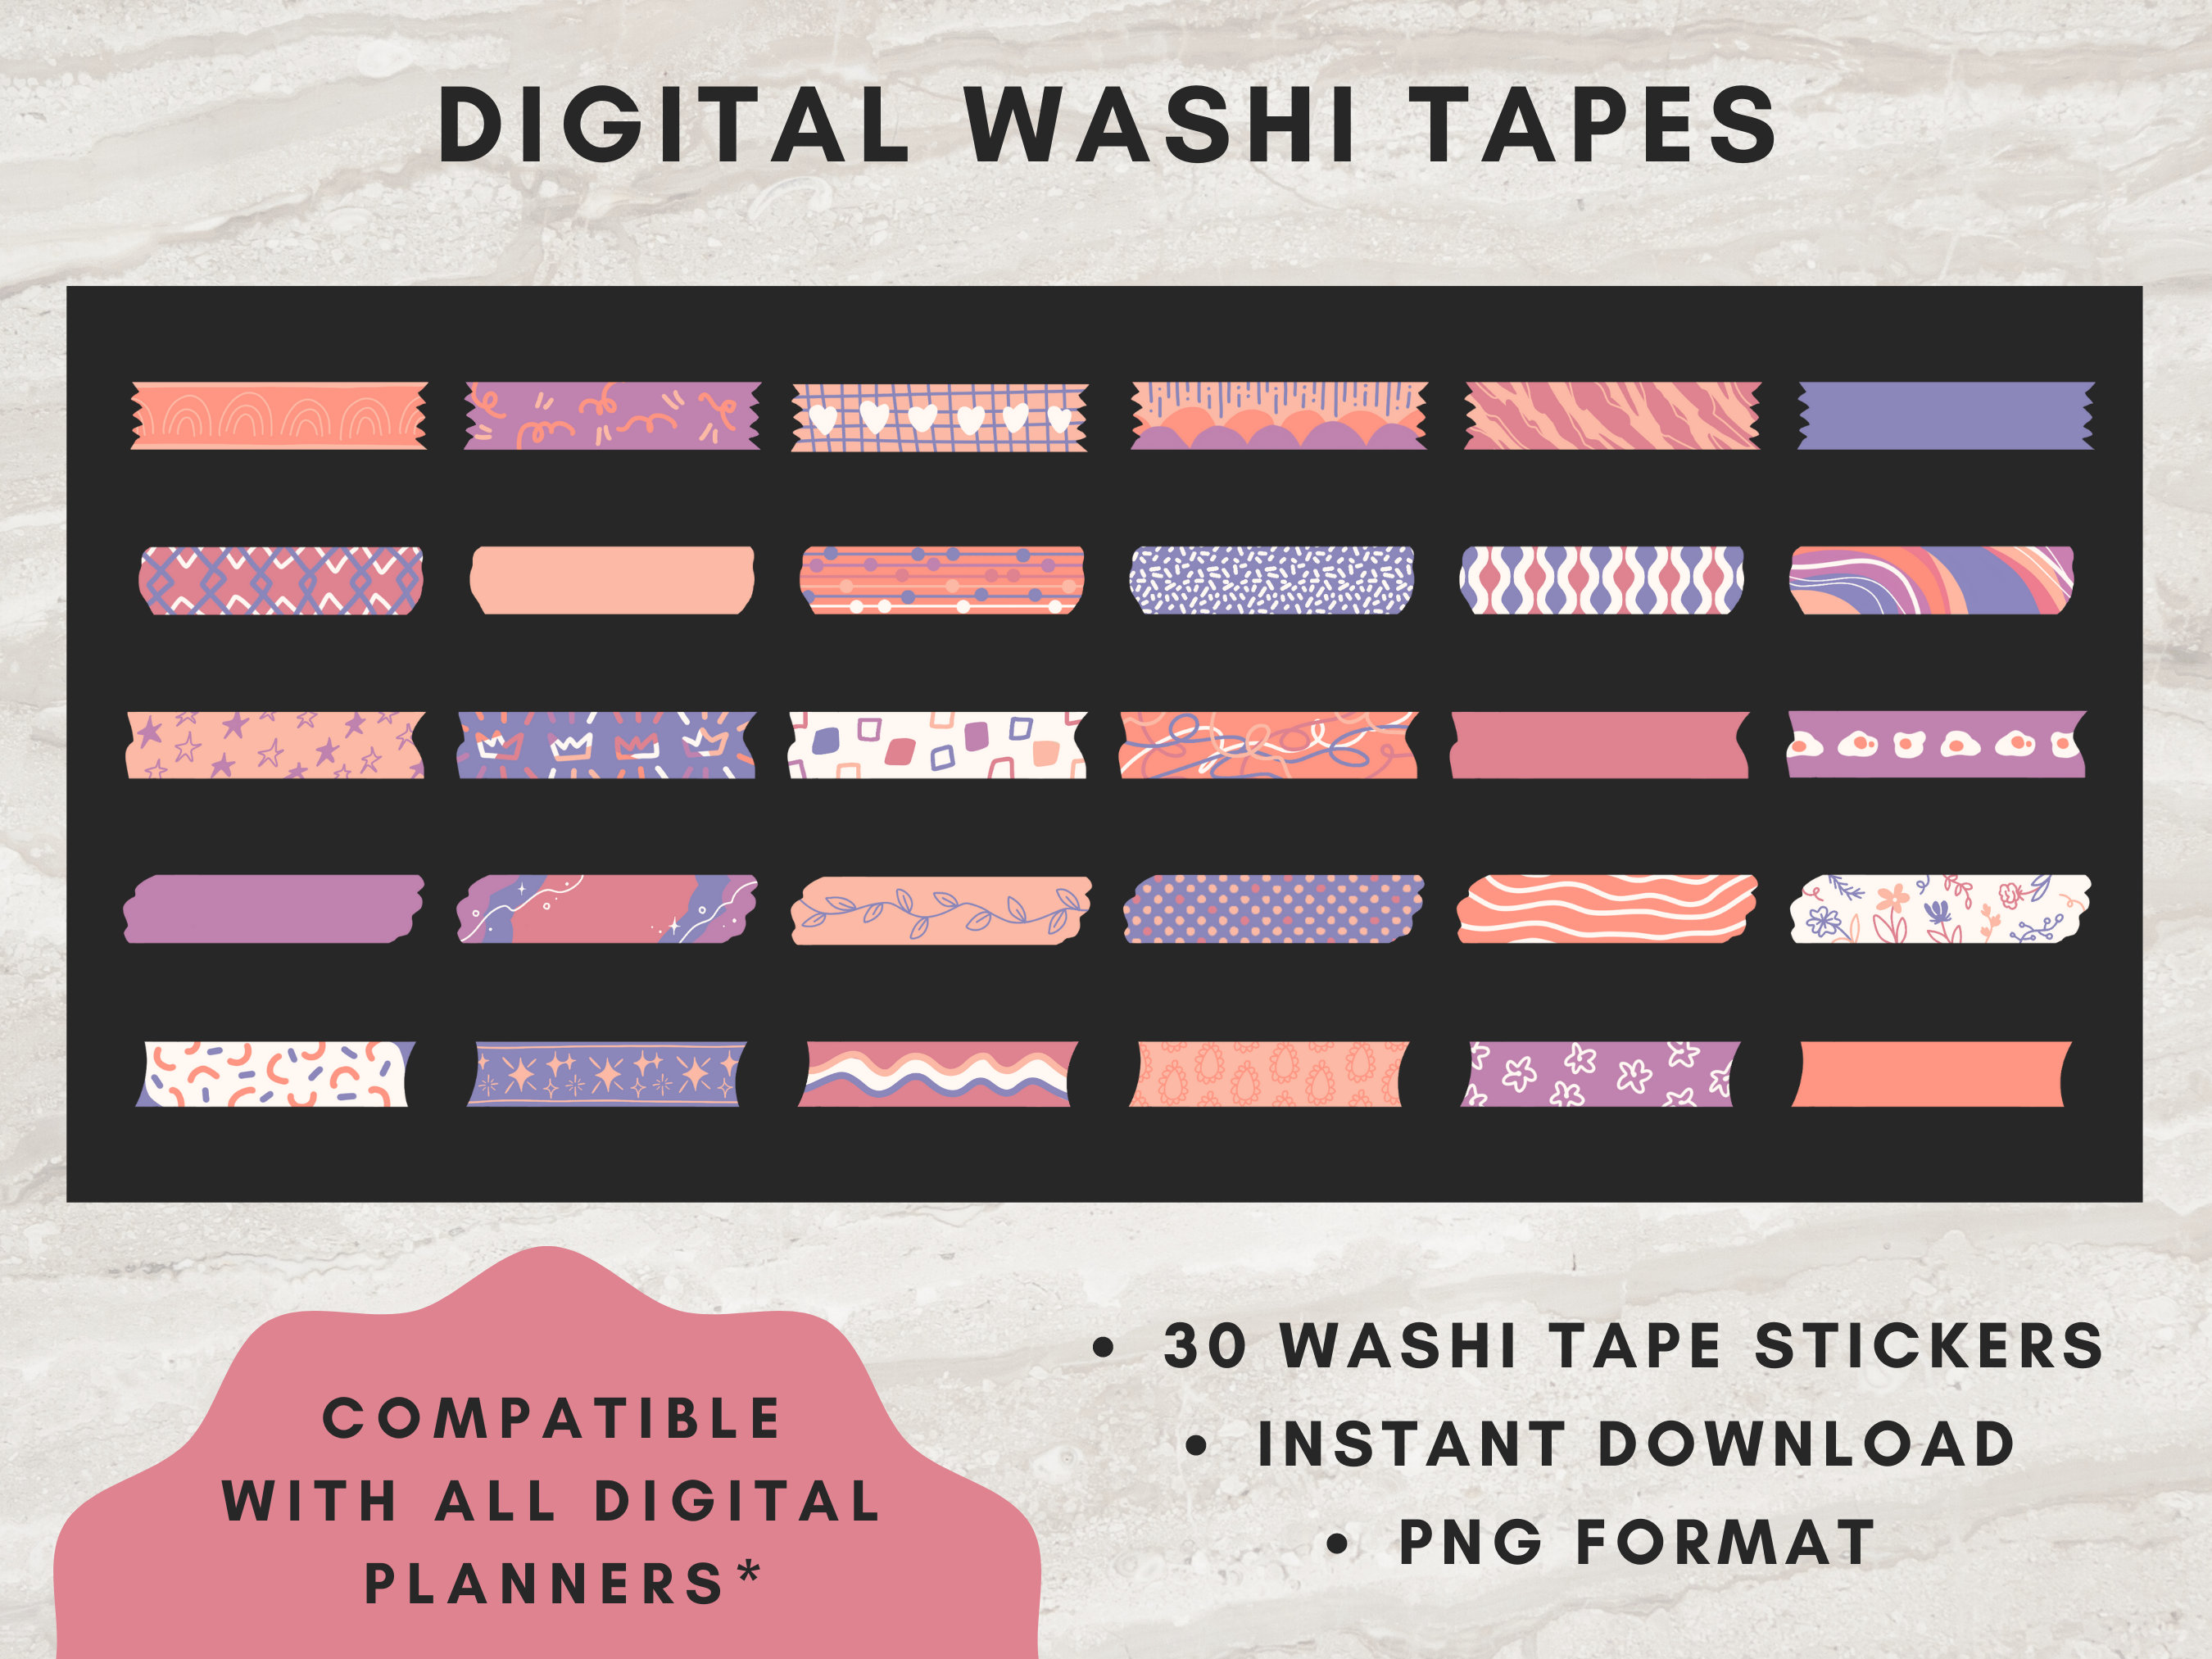 8 Digital Washi Tape Clipart Gráfico por qidsign project